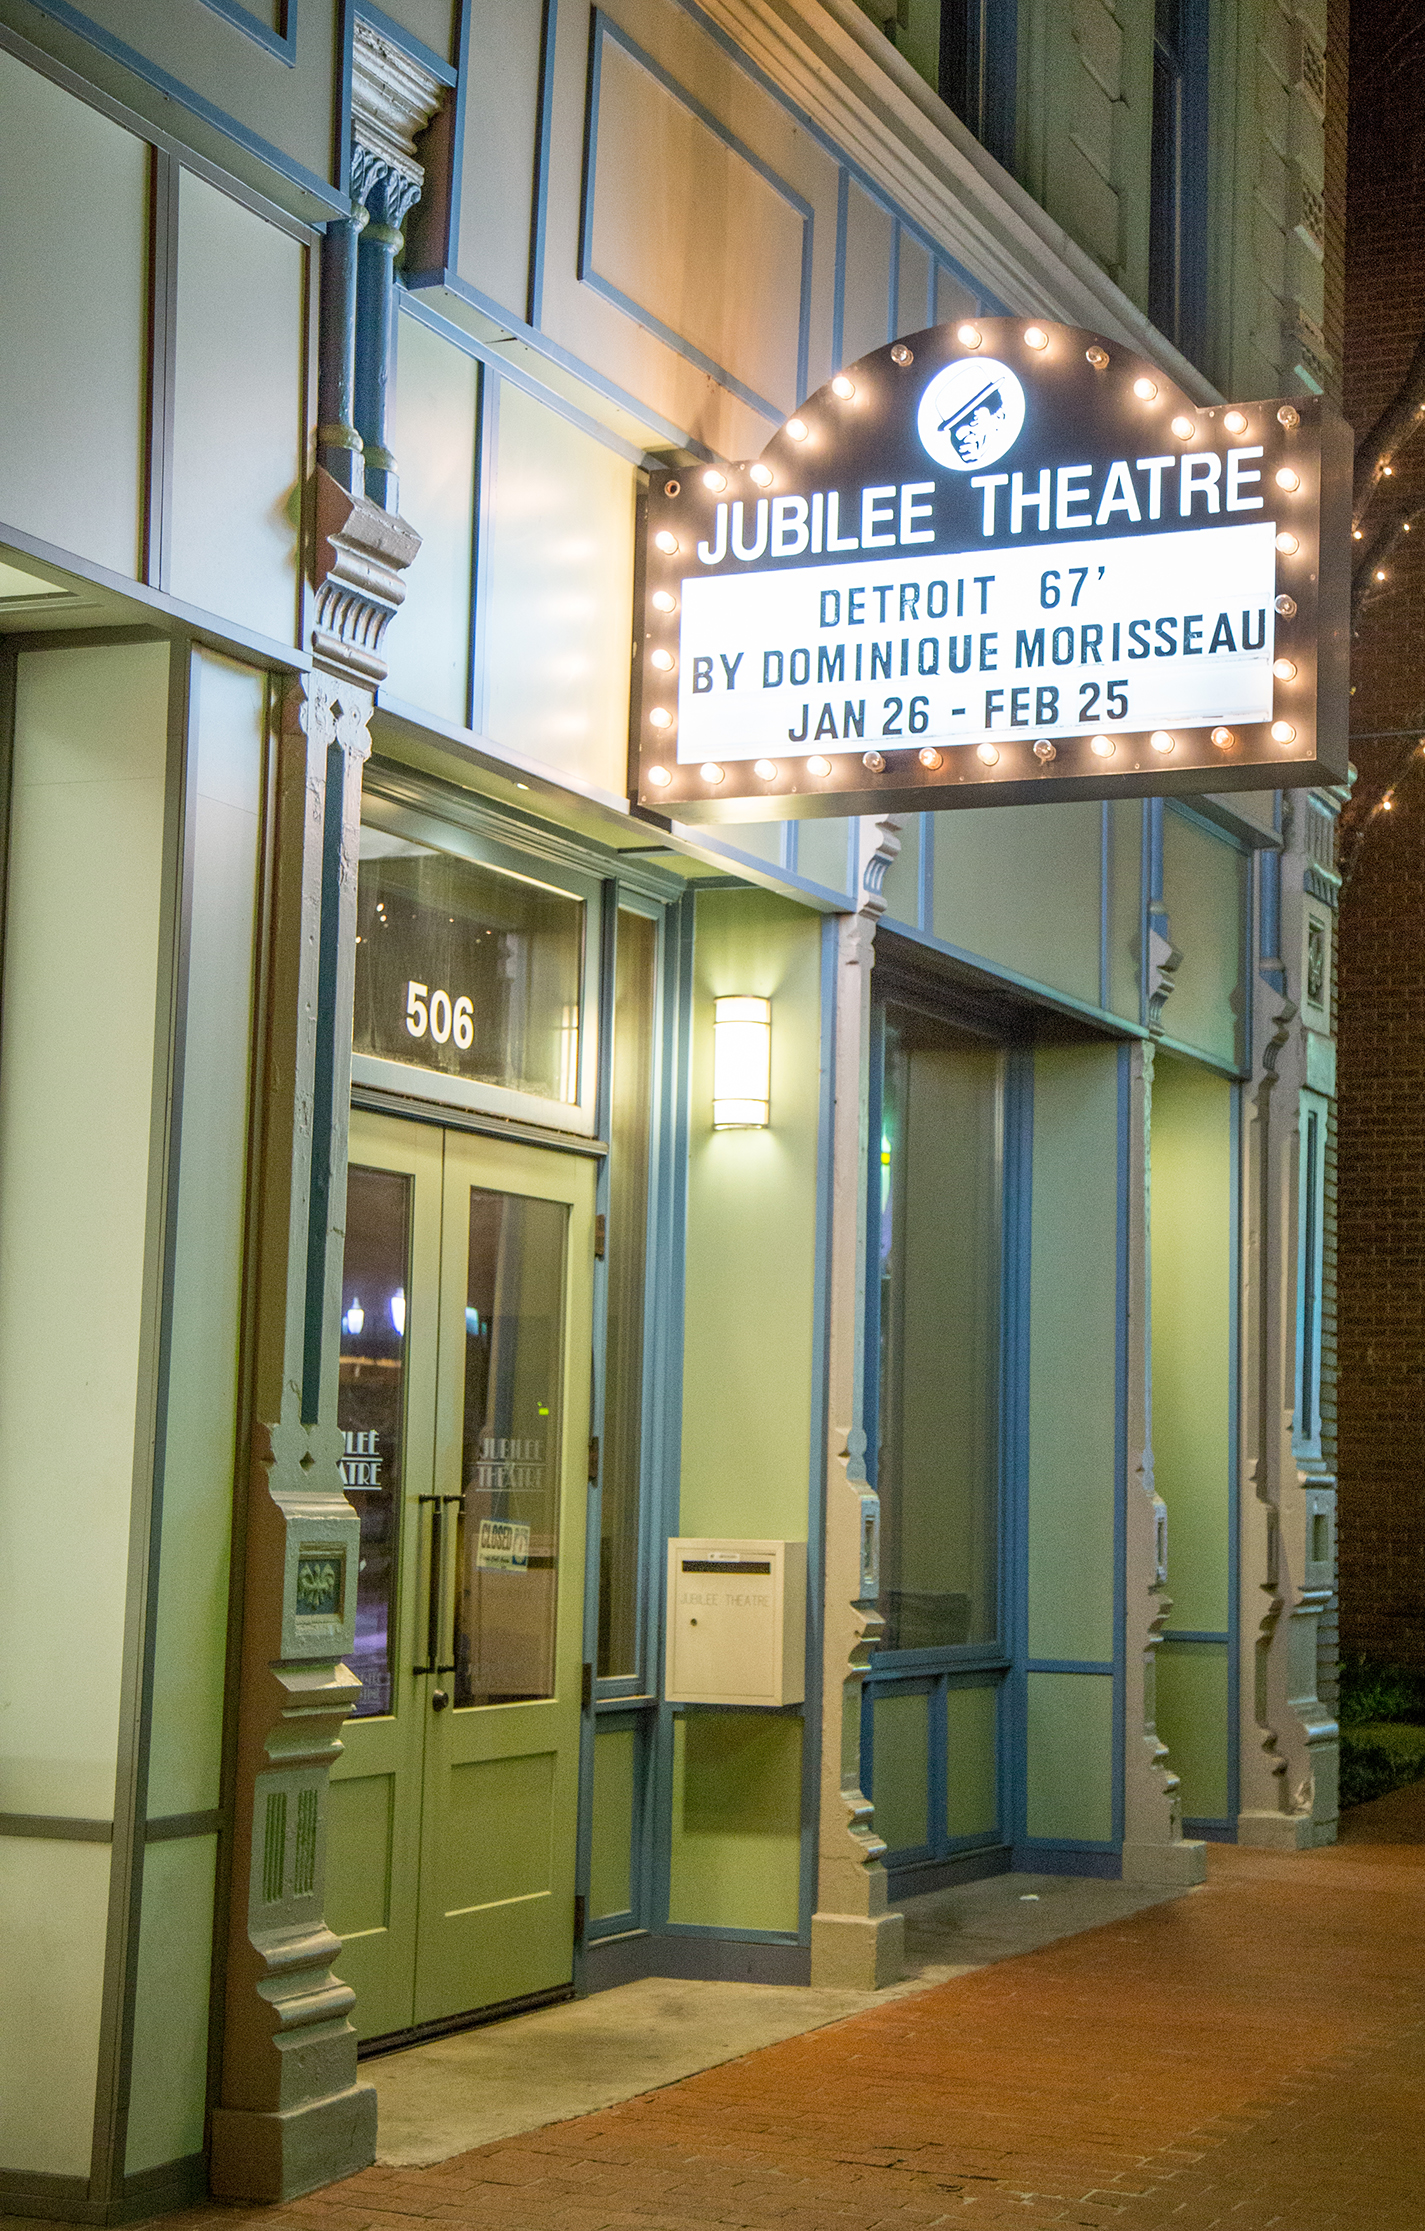 The Jubilee Theatre in downtown Fort Worth will host students for a play centered on the 1967 Detroit riots.